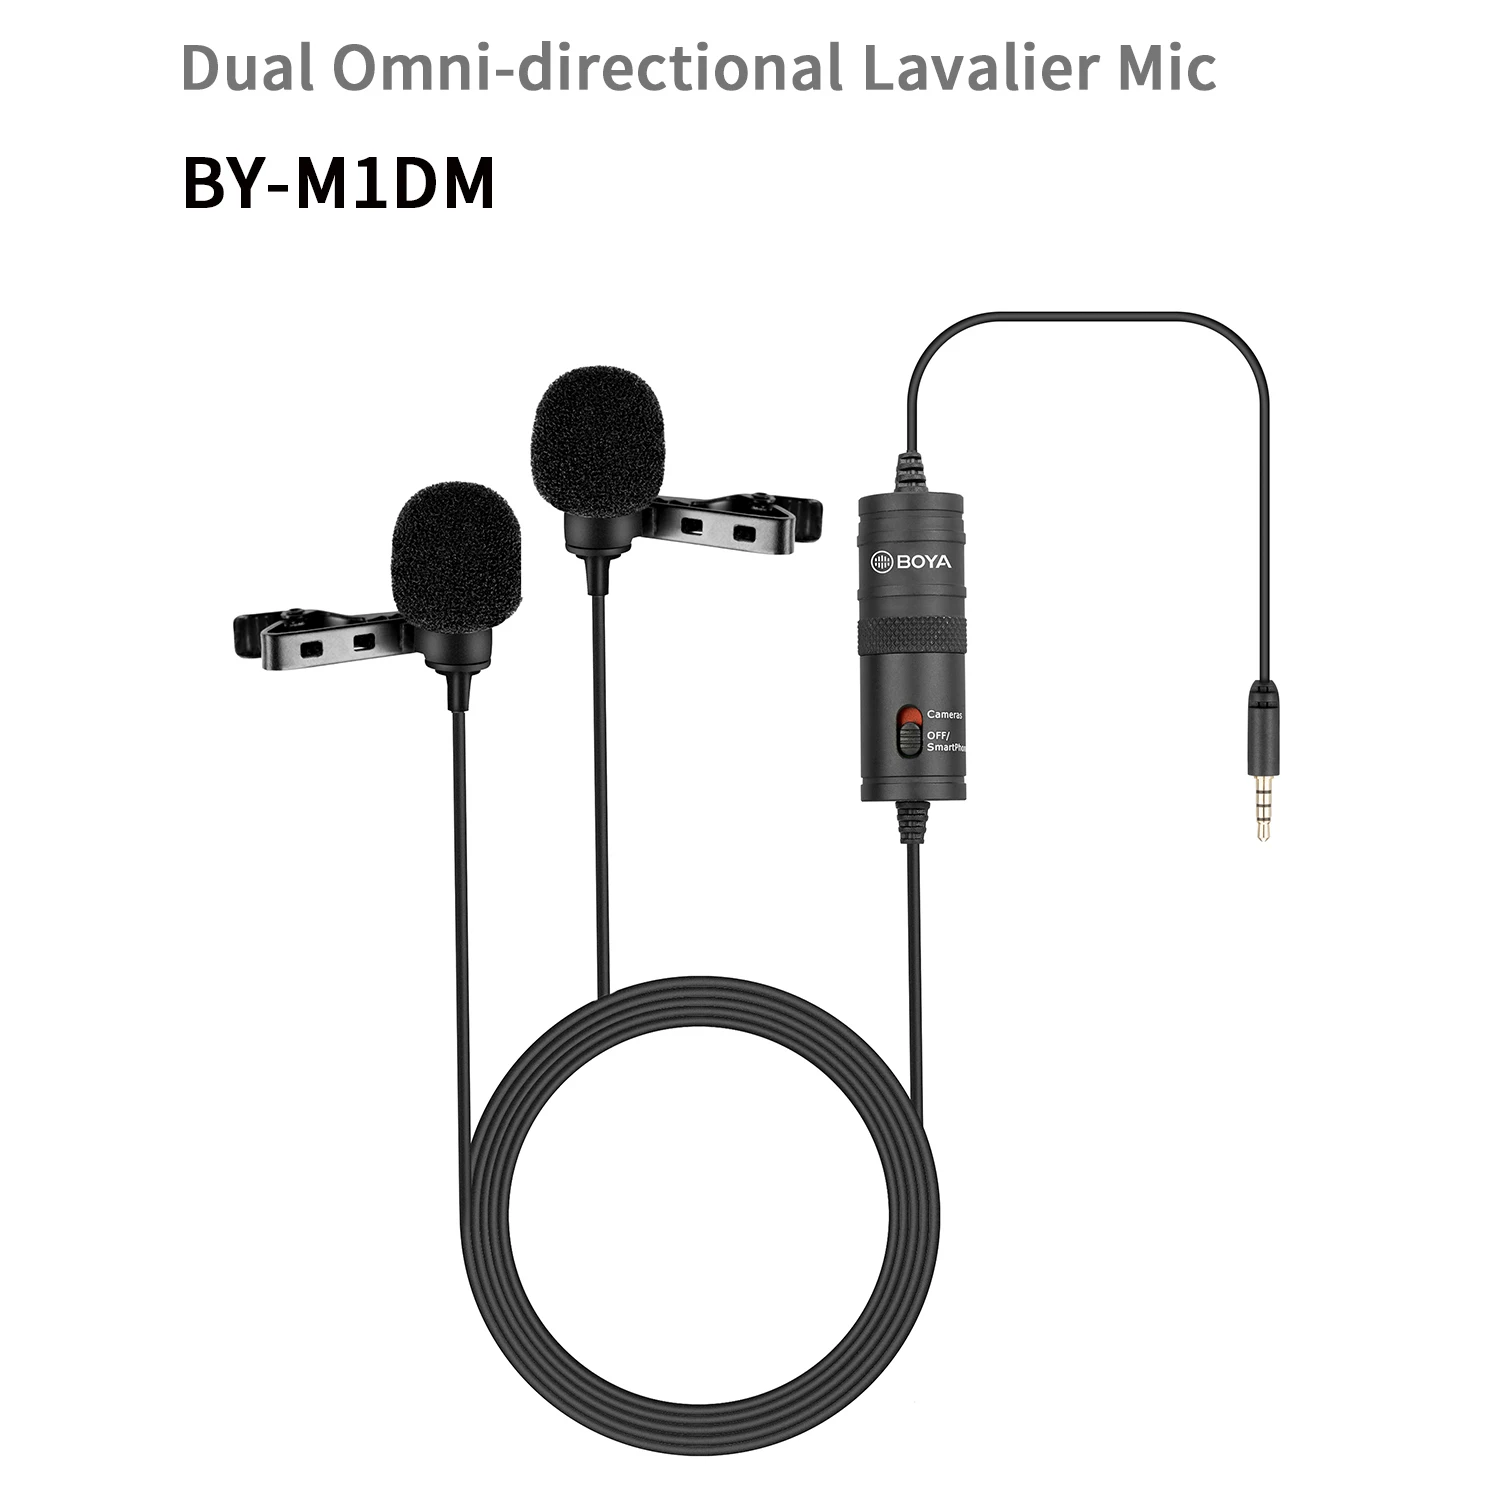 

BOYA BY-M1DM Dual Head Lavalier Omnidirectional Condenser Microphone Audio Record for iPhone Andriod DSLR Canon Nikon Camcorder